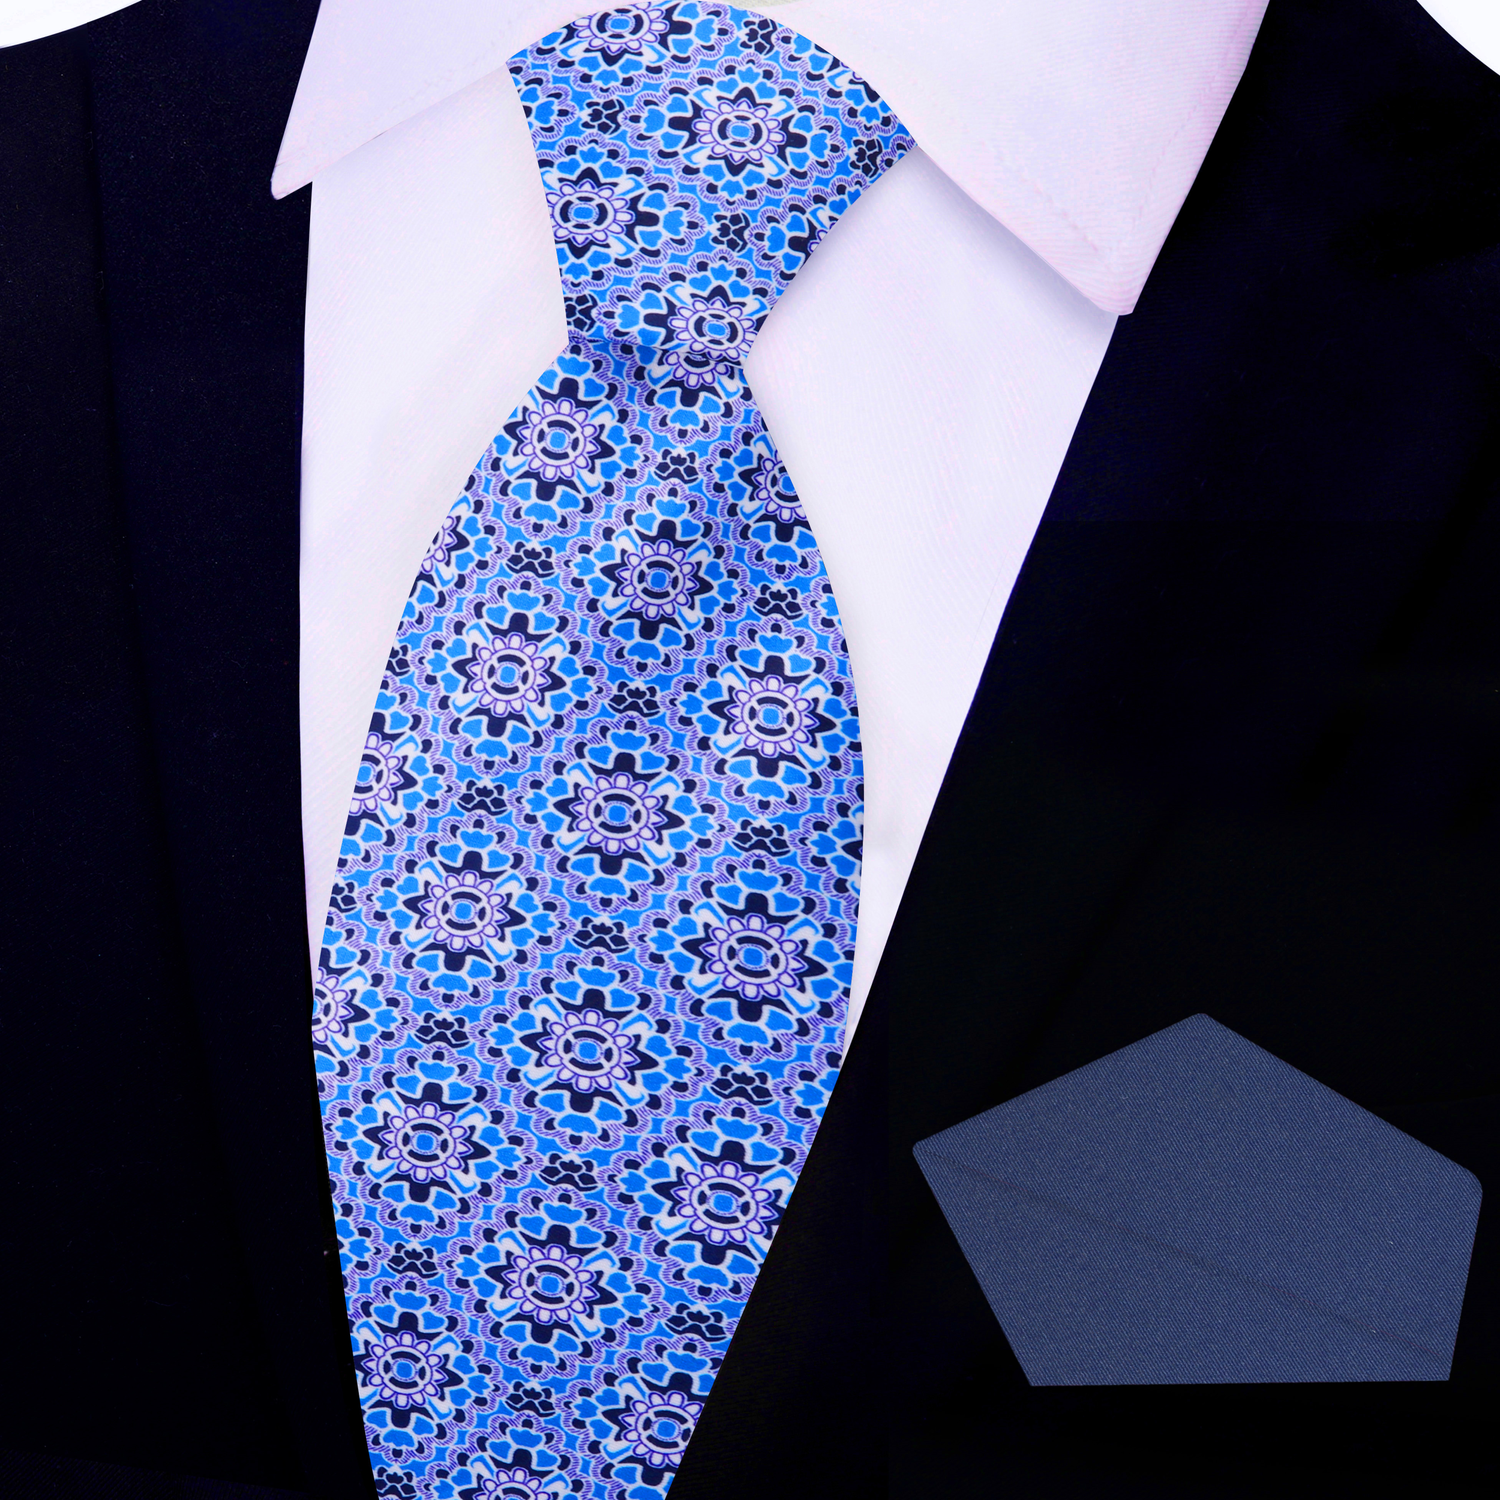 View 2: Blue Mosaic Necktie and Blue Square